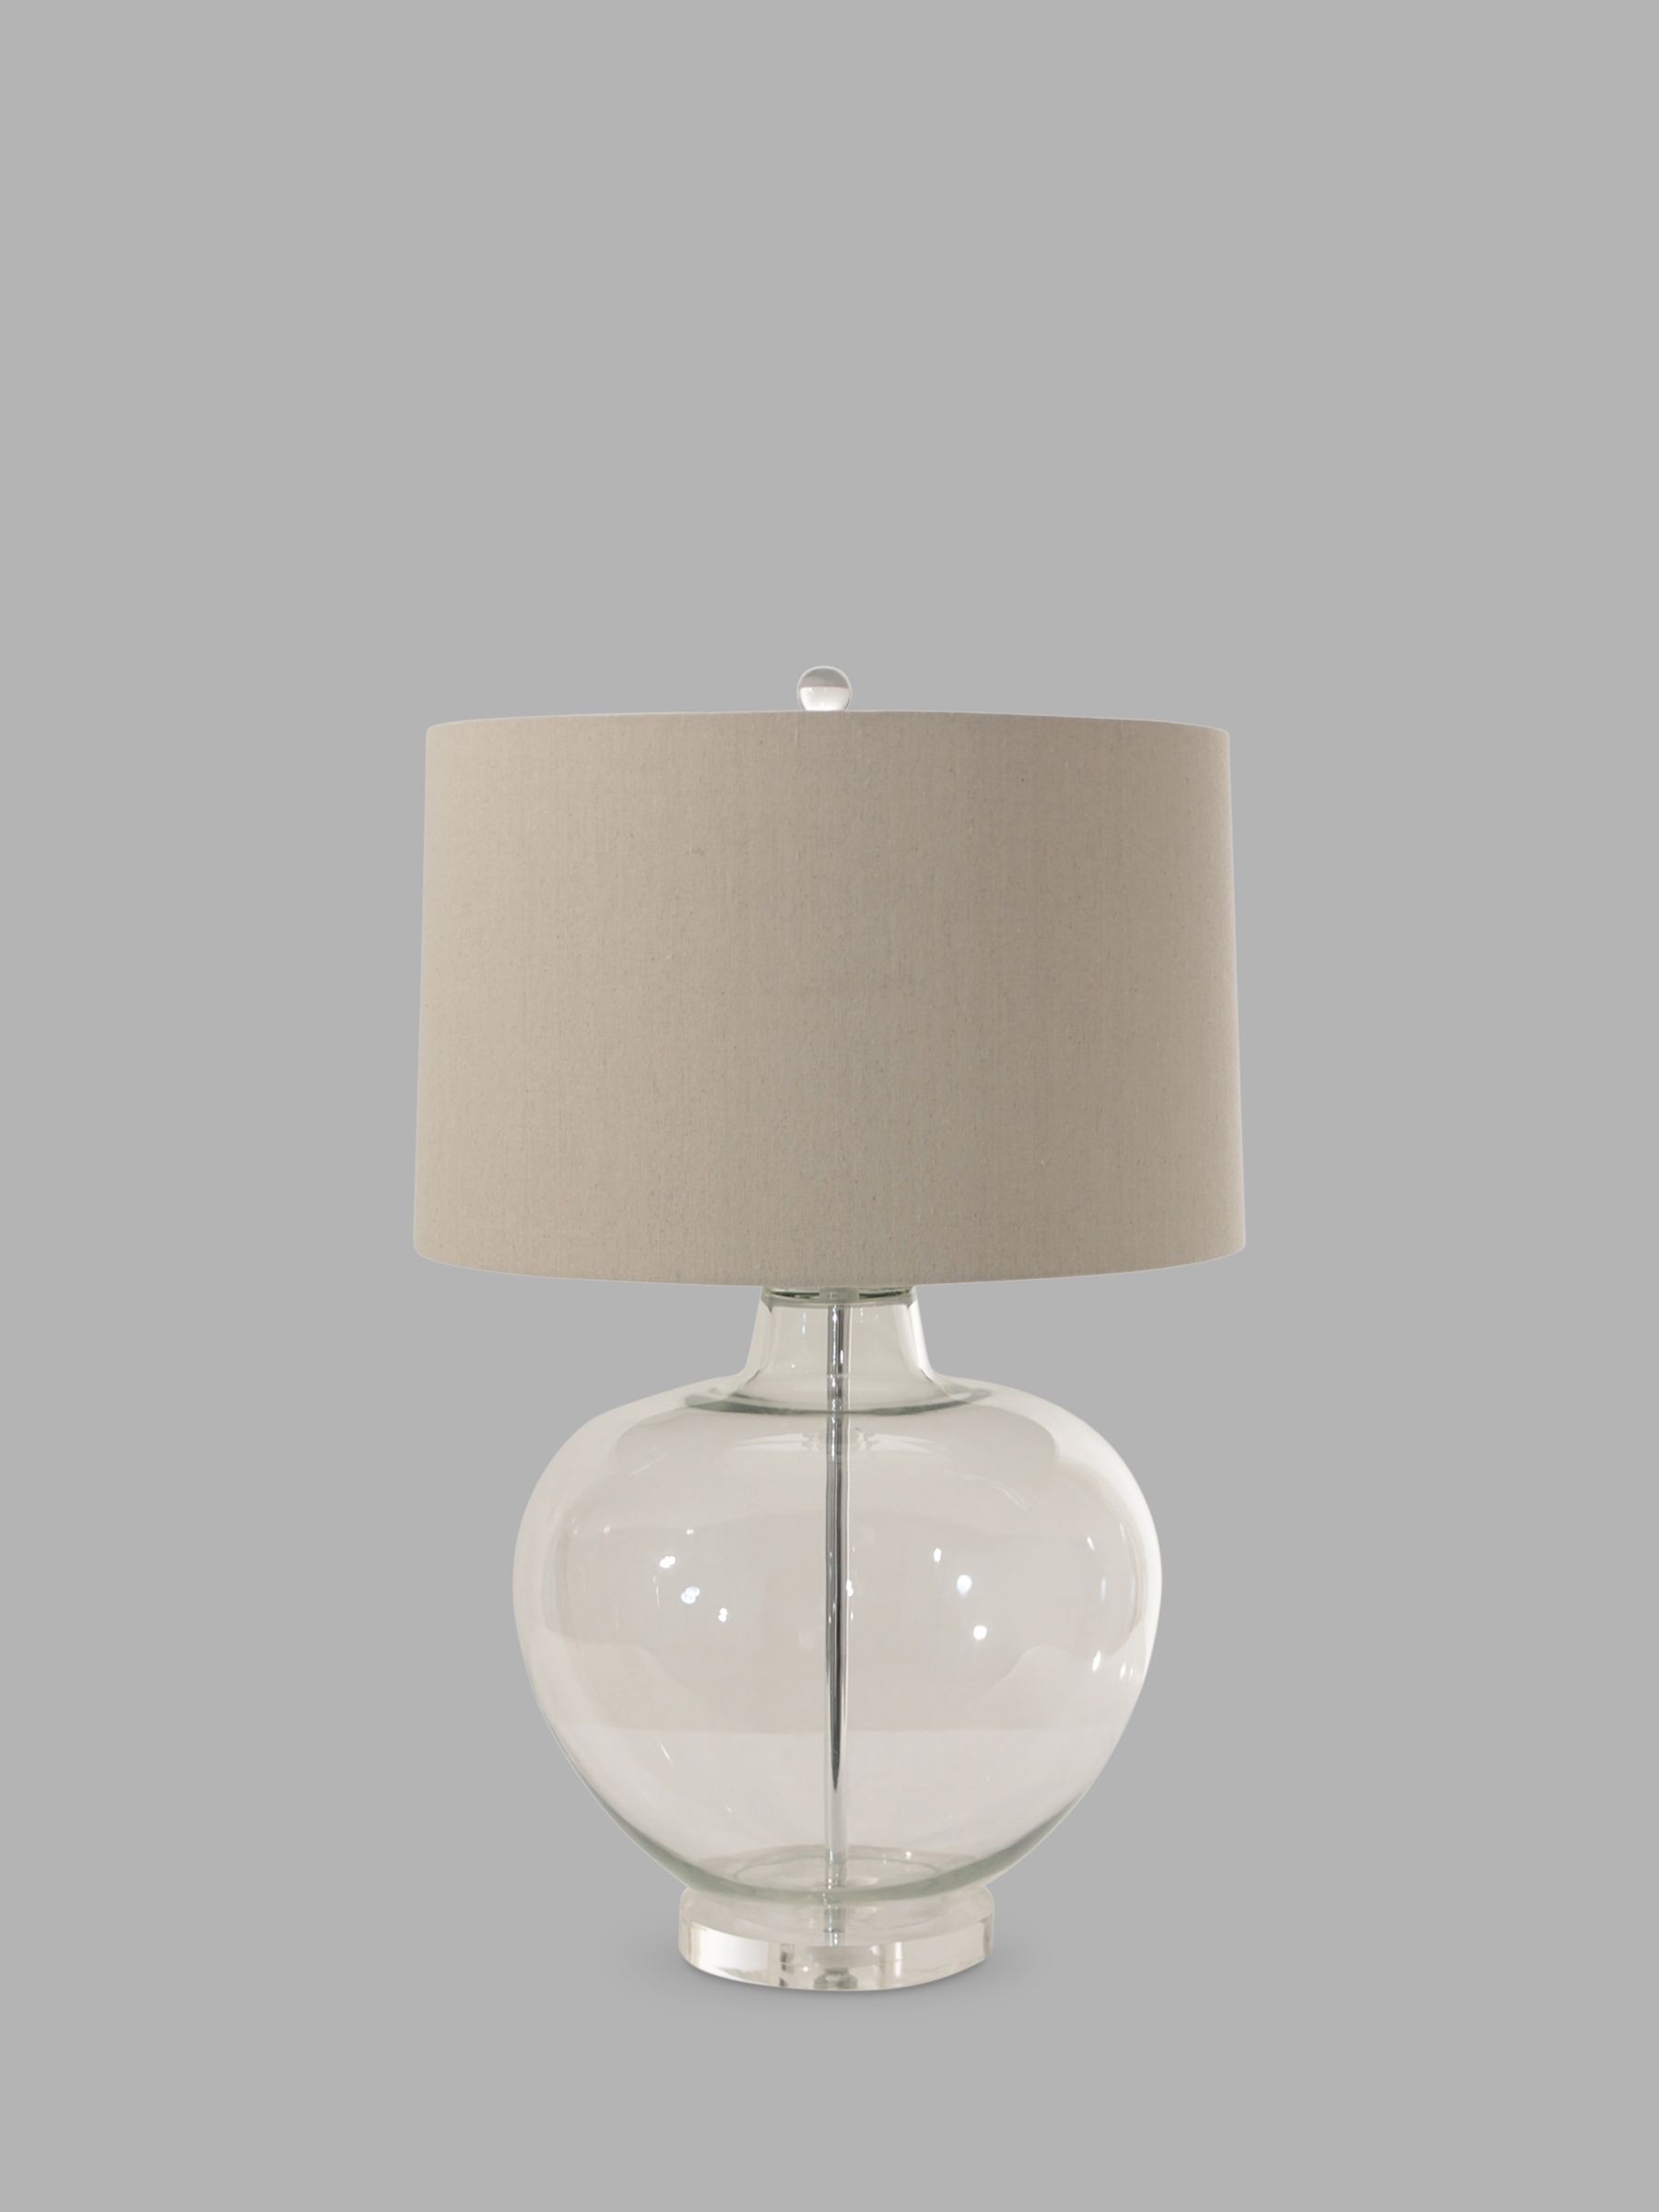 Photo of One.world clifton apple glass base linen shade table lamp clear